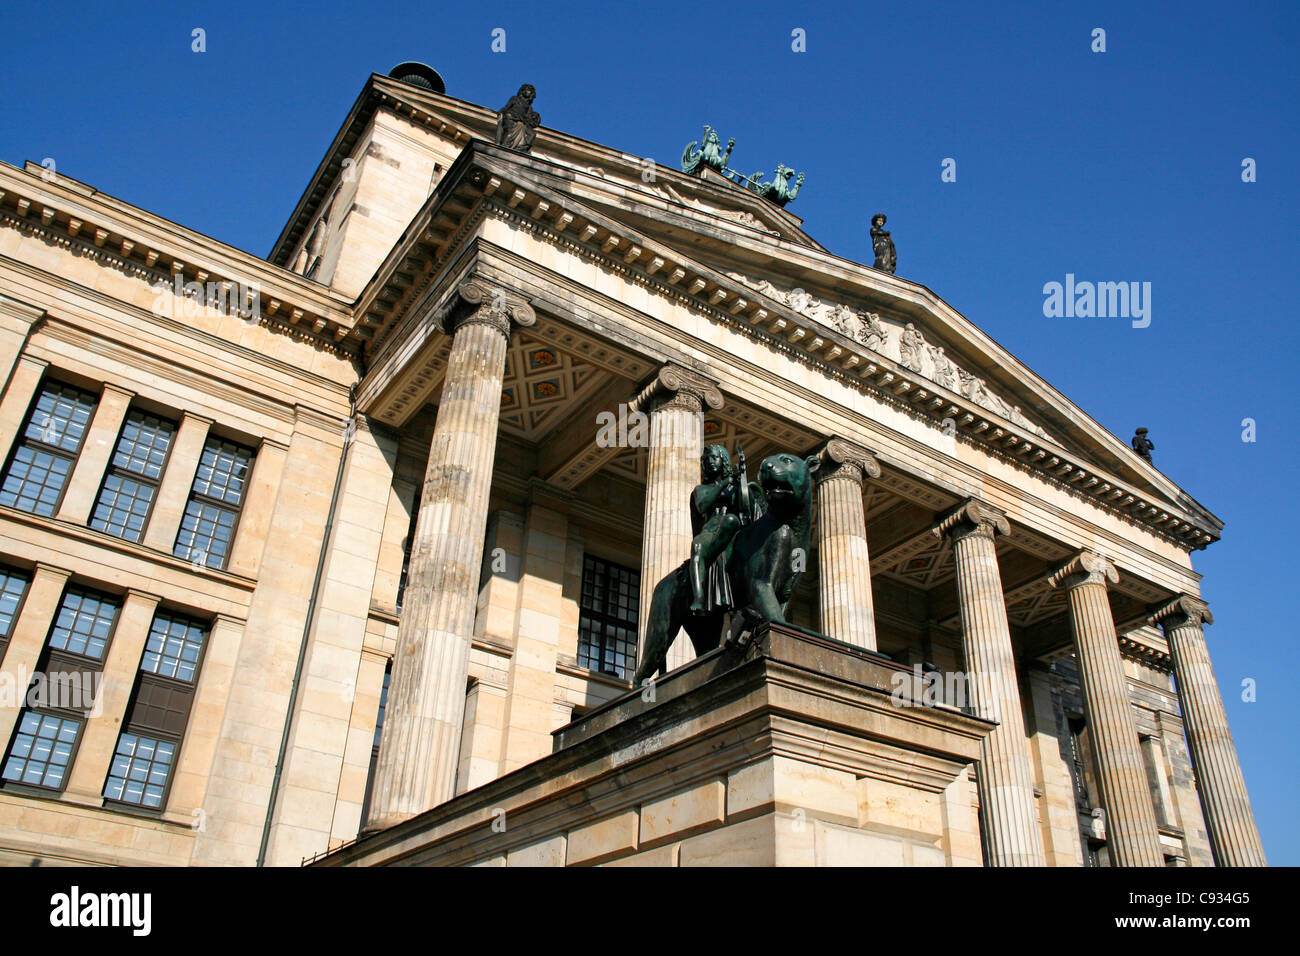 The Gendarmenmarkt is a square in Berlin, and the site of the Konzerthaus and the French and German Cathedrals. Germany. Stock Photo